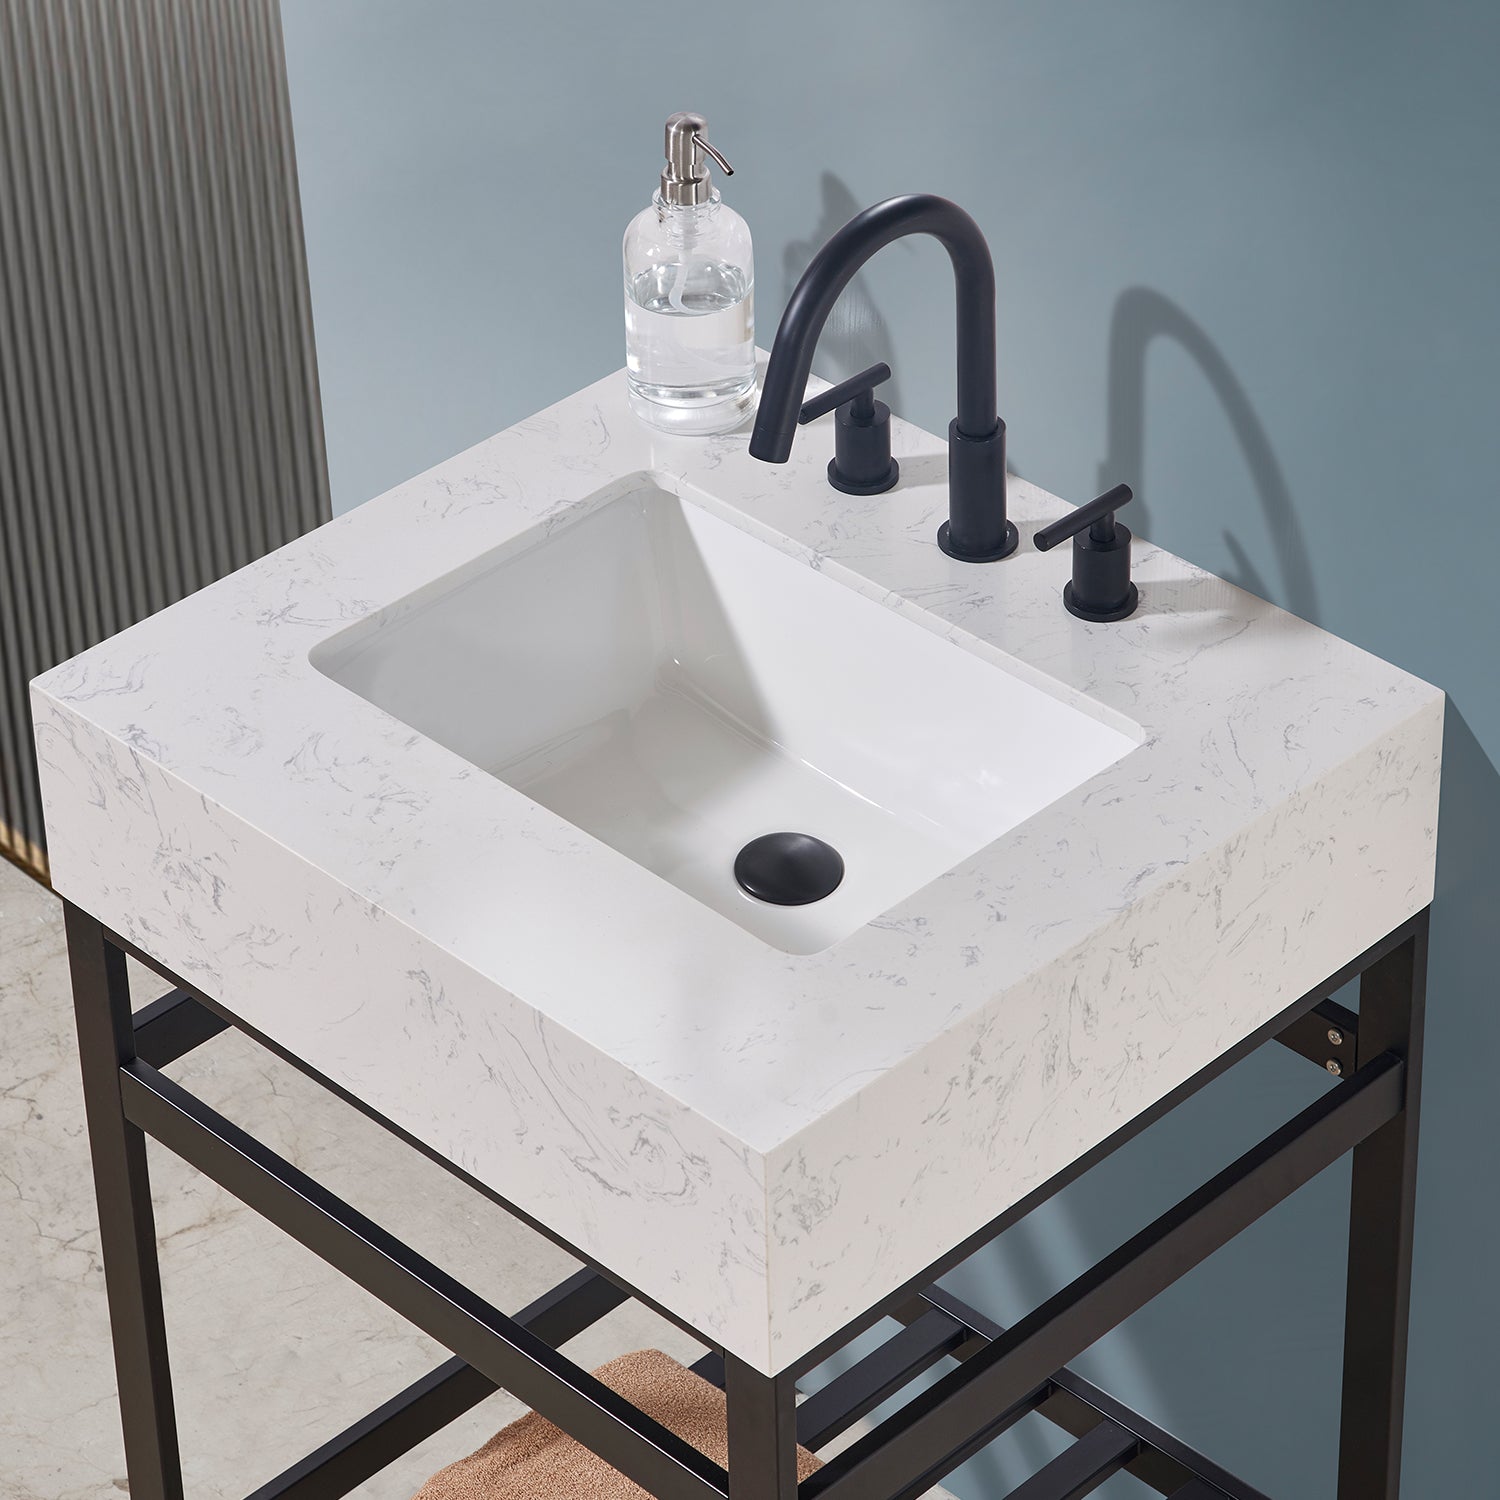 Merano 24" Single Stainless Steel Vanity Console with Aosta White Stone Countertop